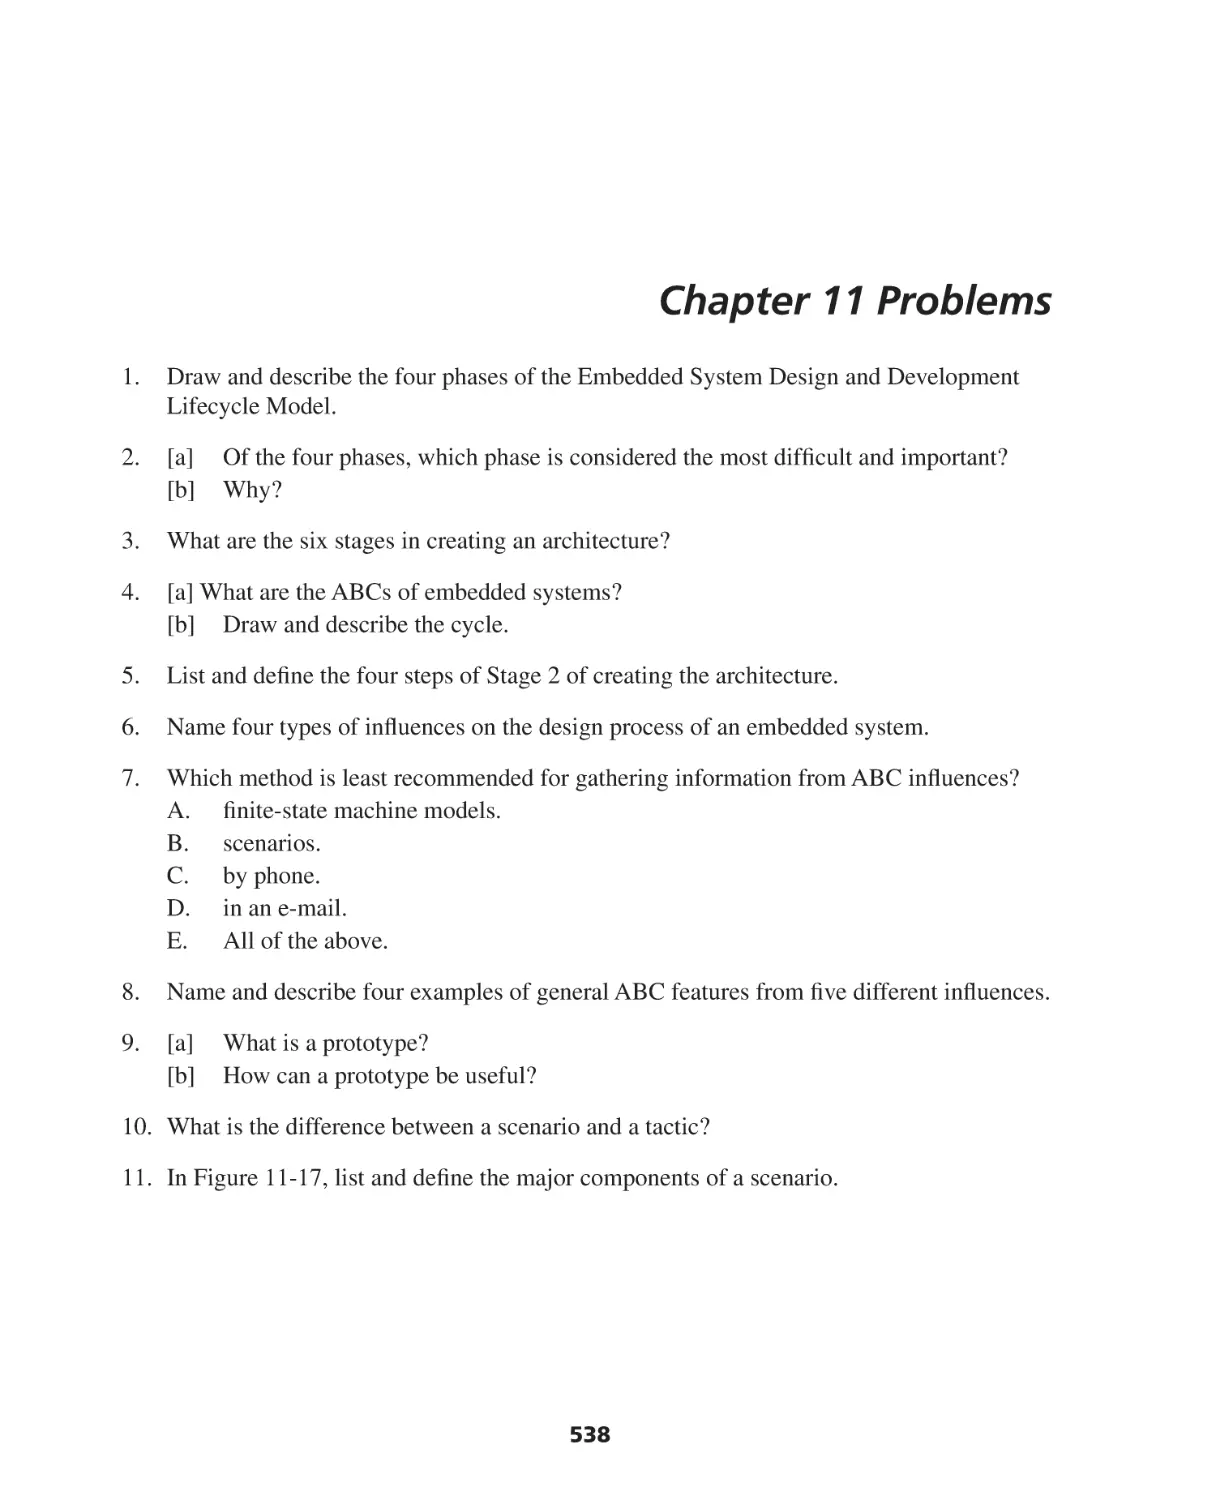 Chapter 11 Problems